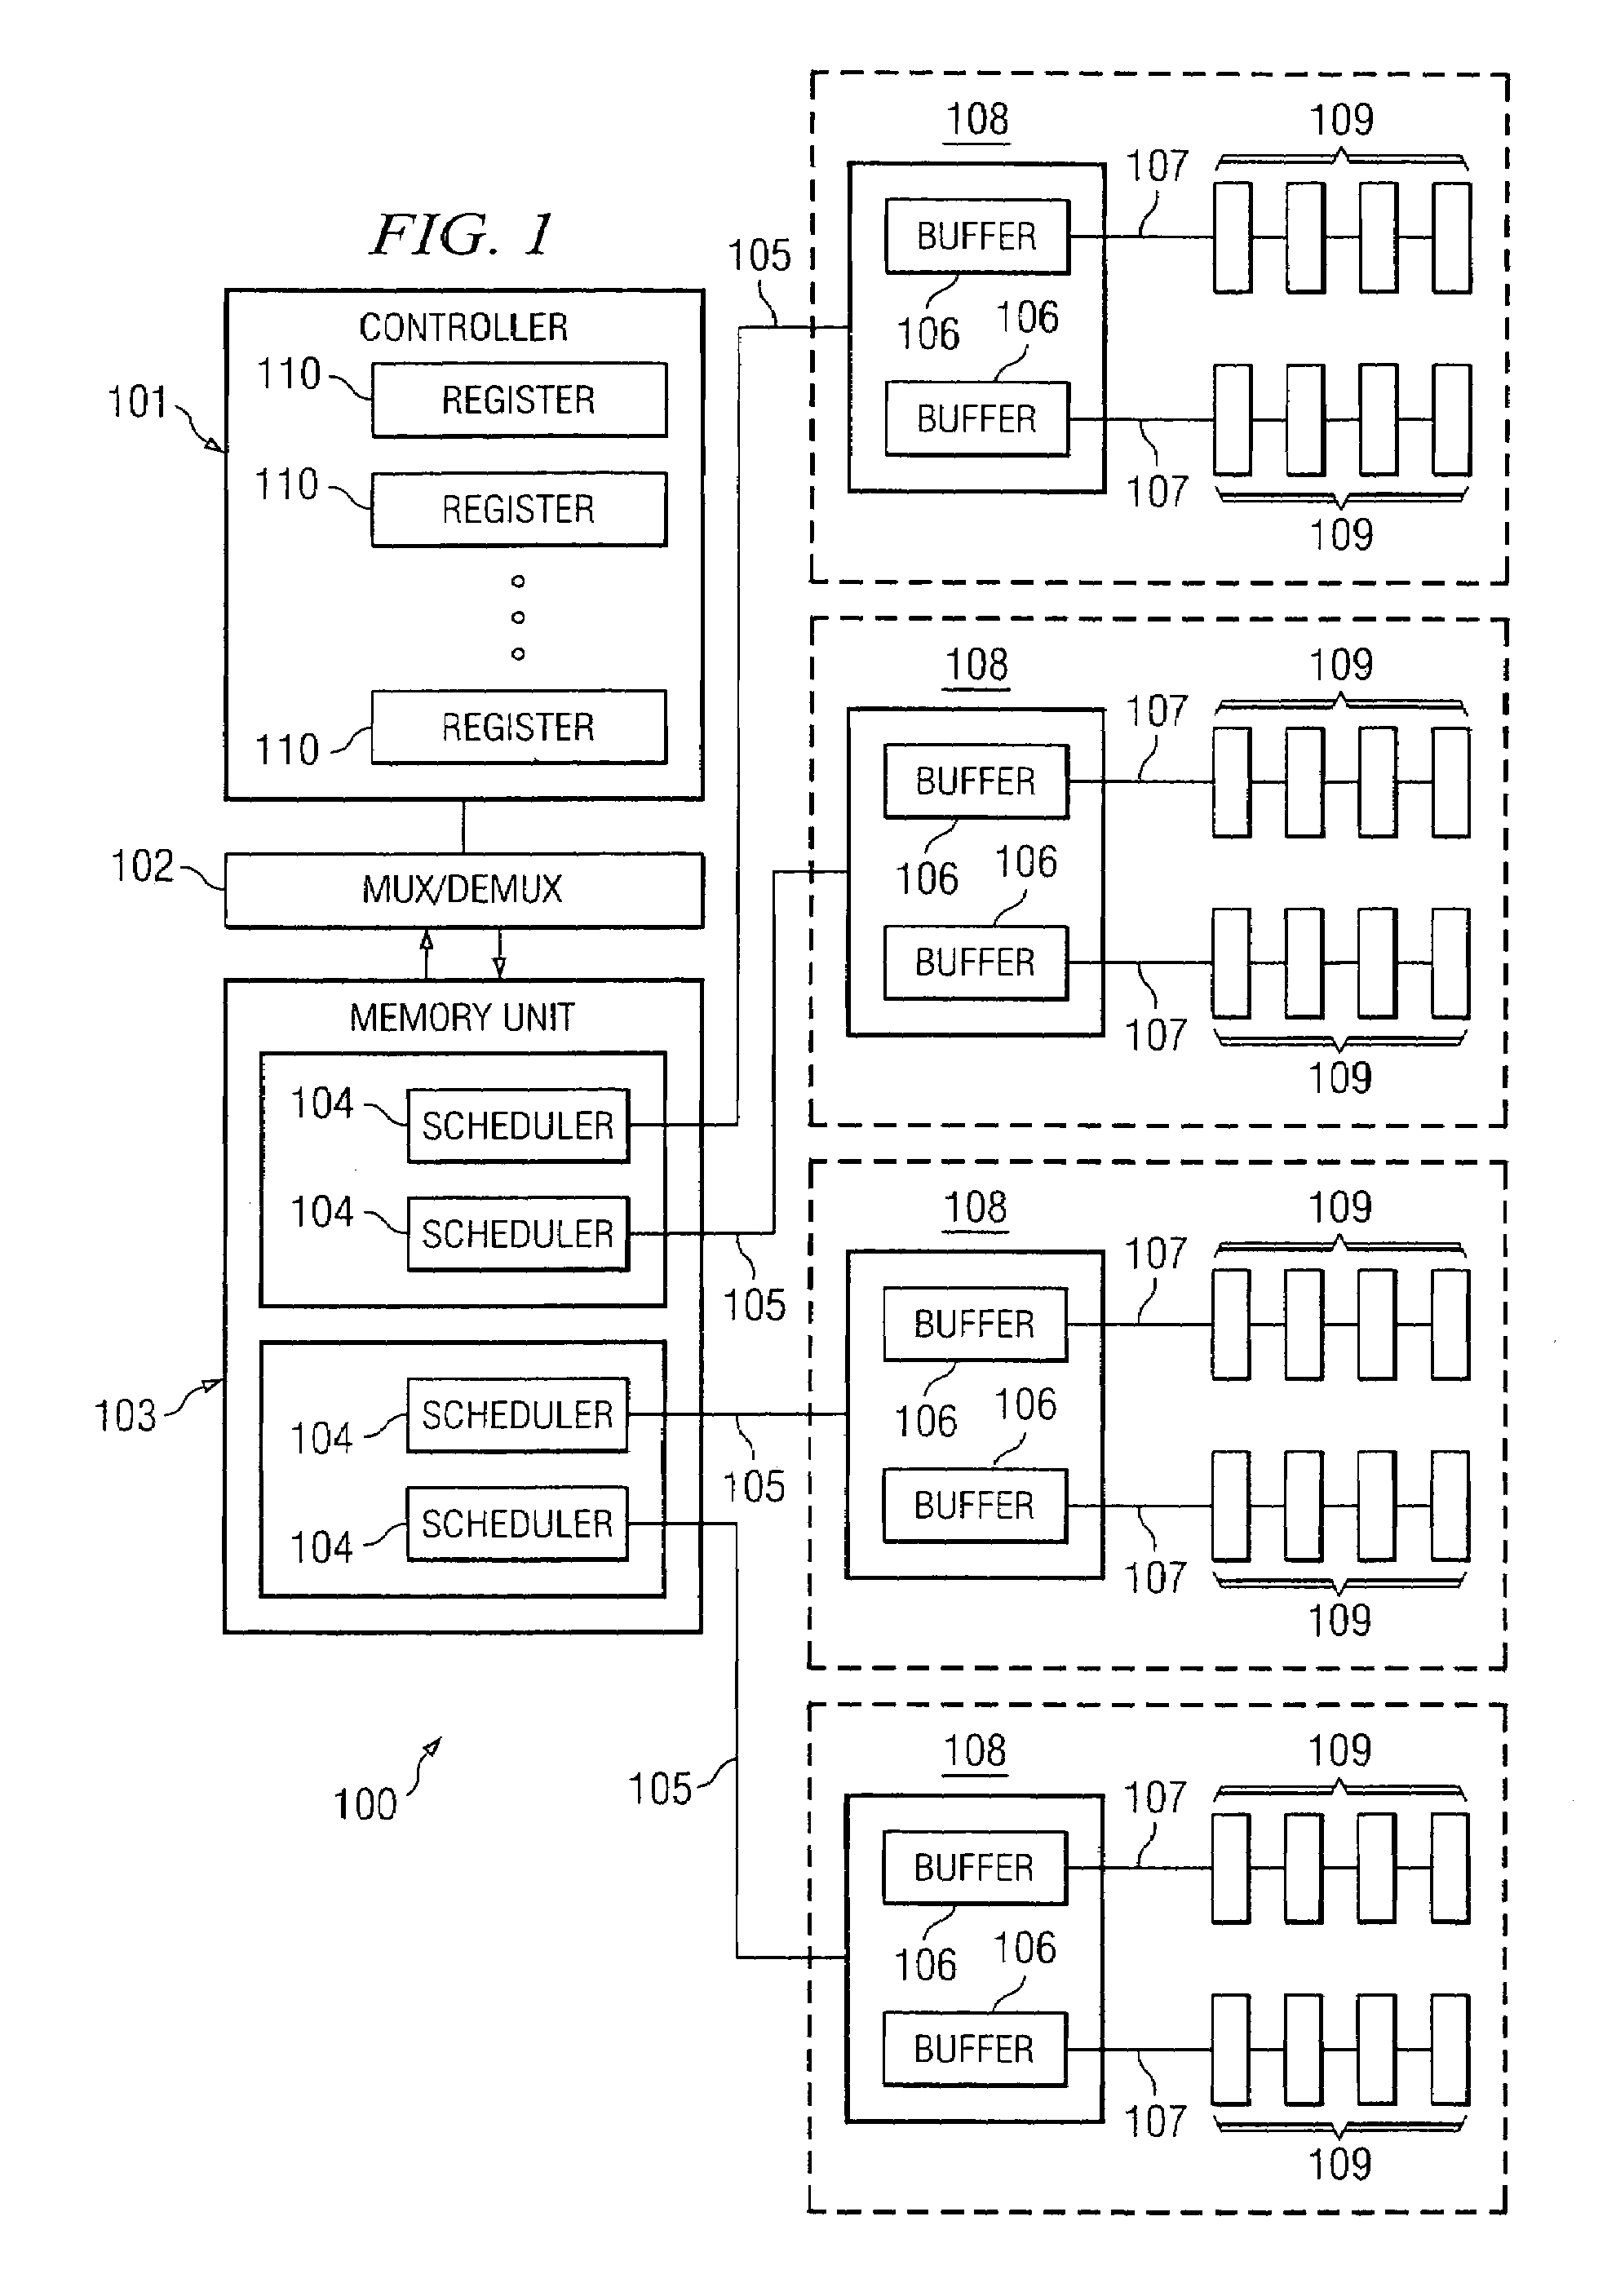 Systems and methods for providing error correction code testing functionality